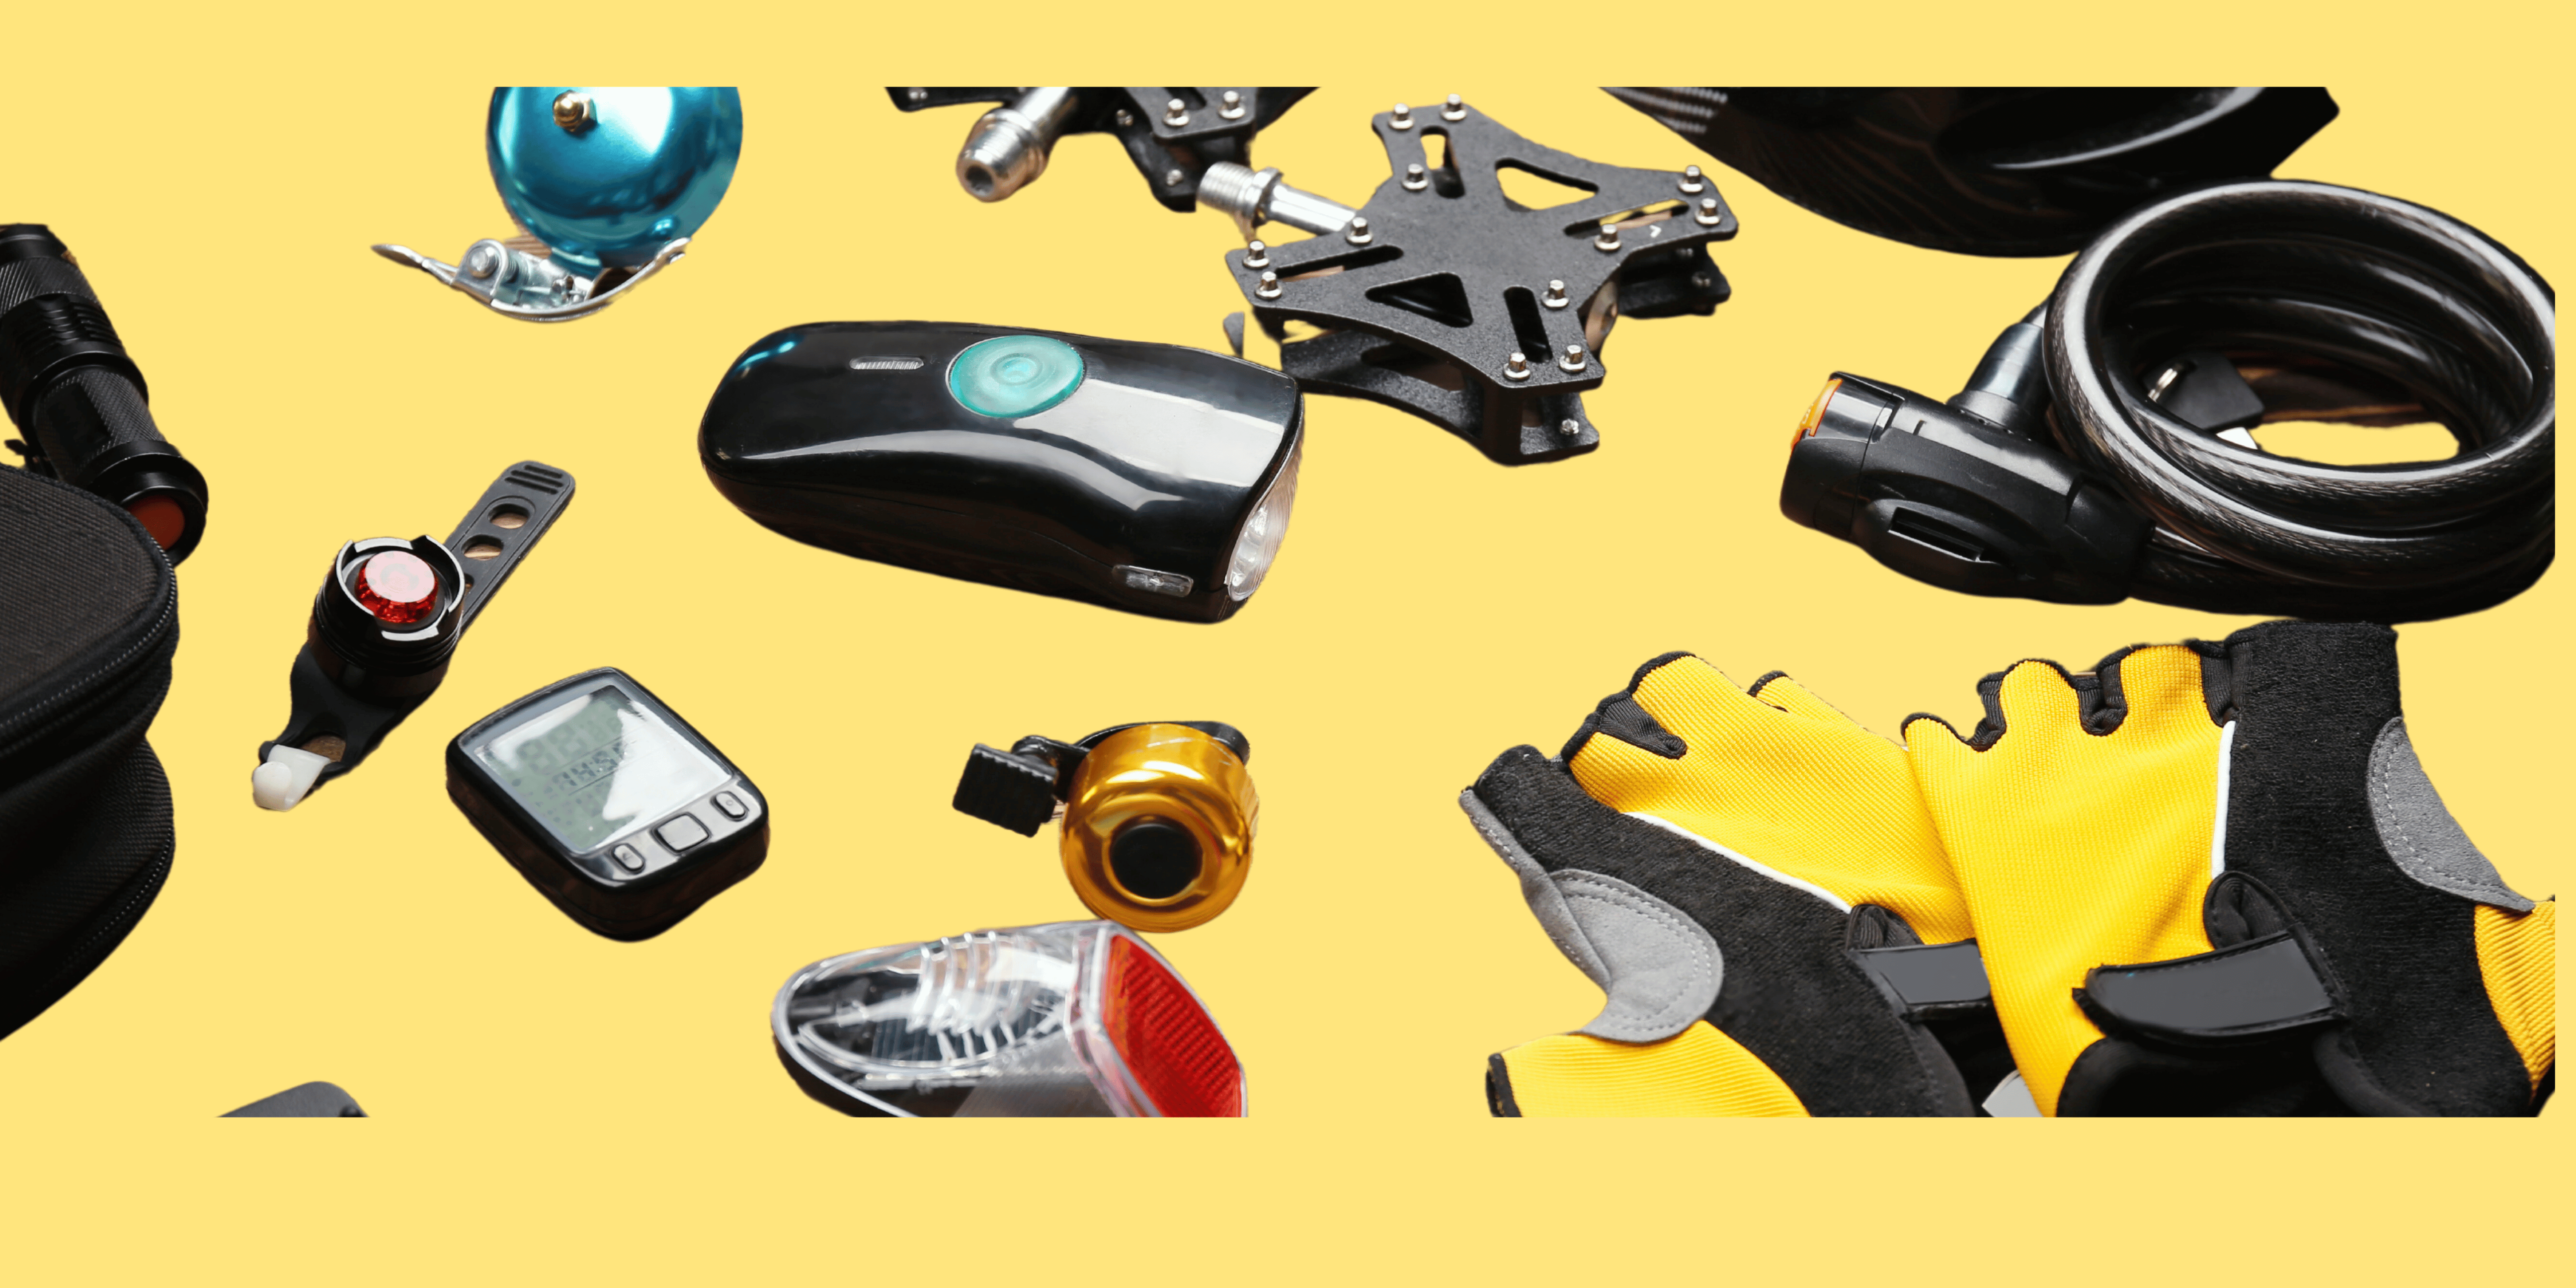 Cycling saddles, cycling pedals, cycling seats and cycling headlamps